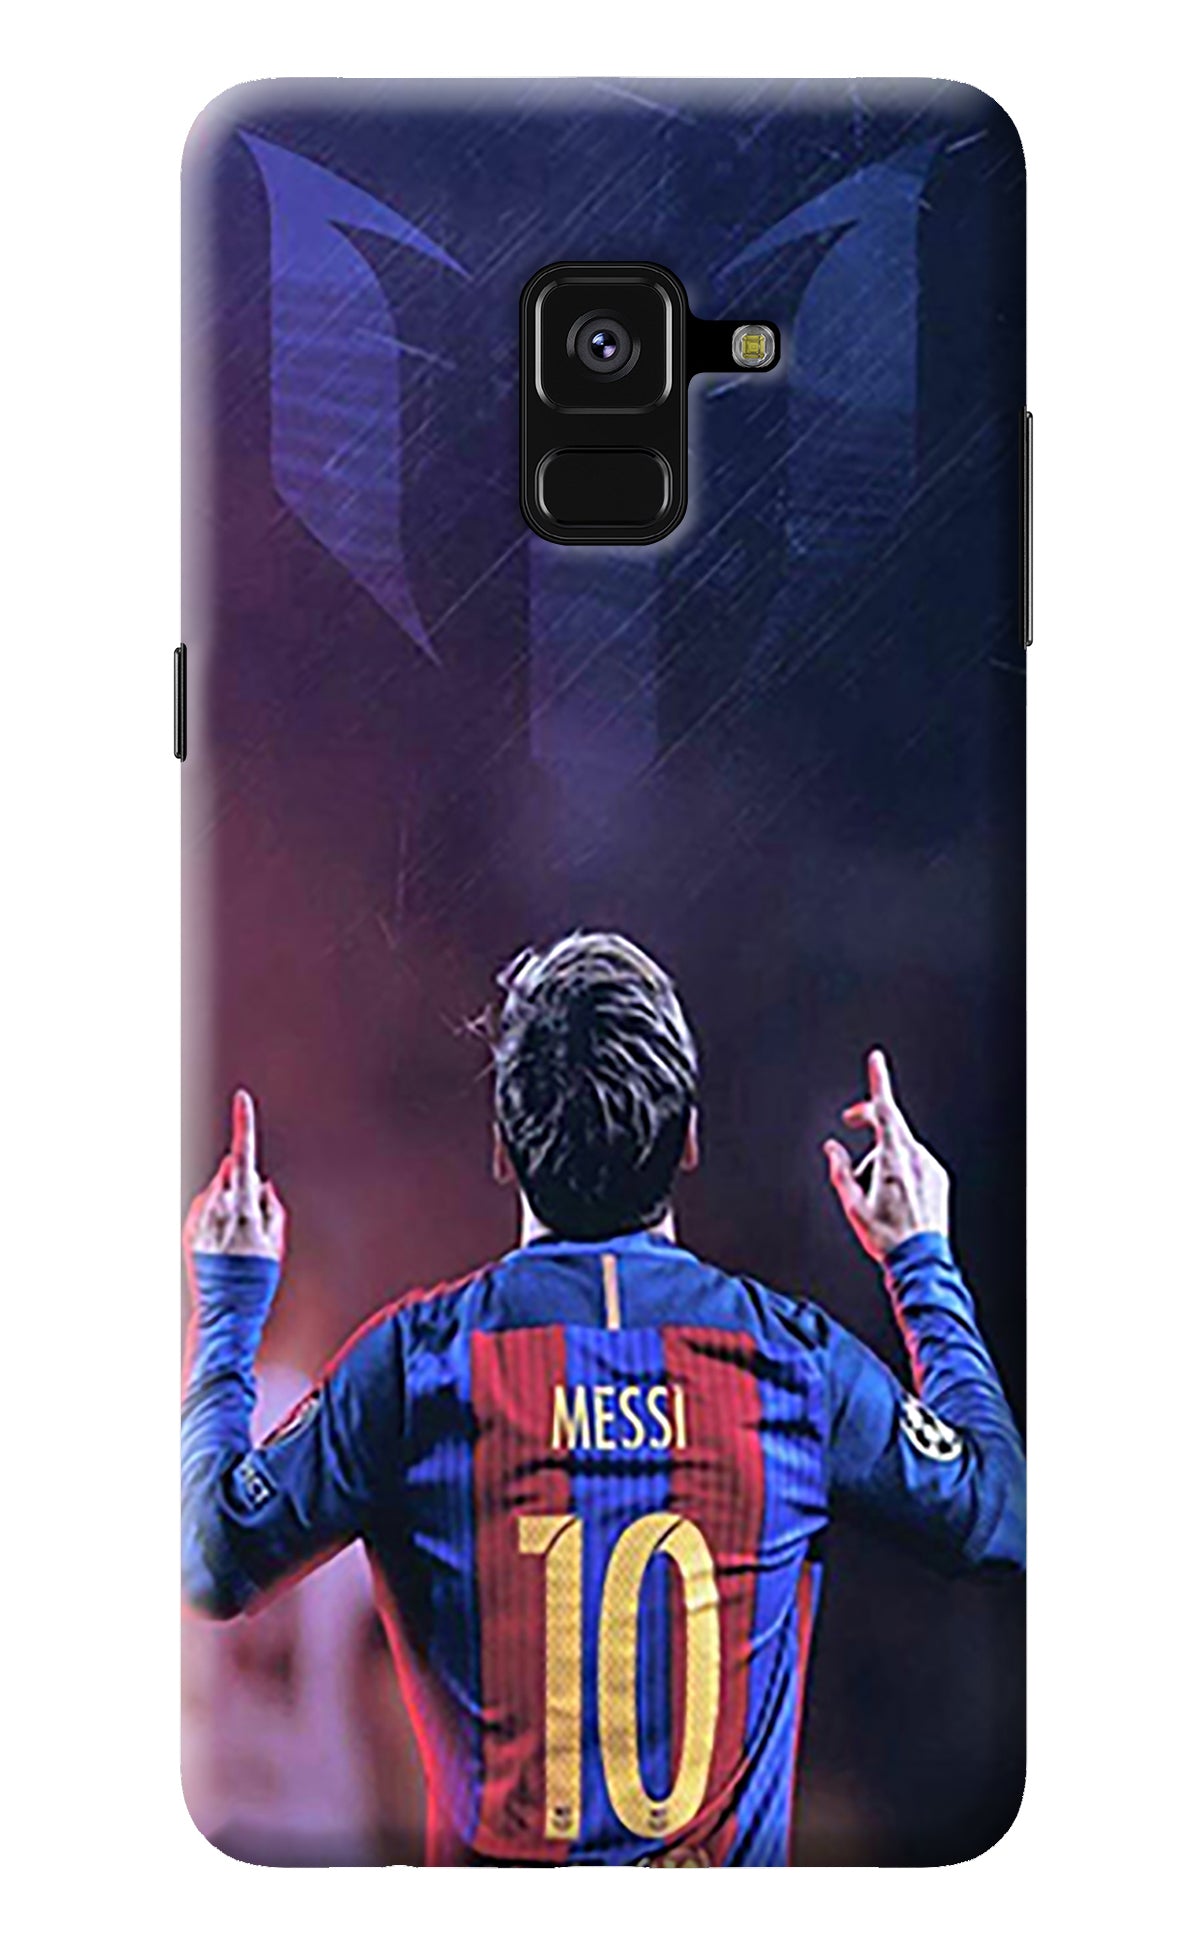 Messi Samsung A8 plus Back Cover